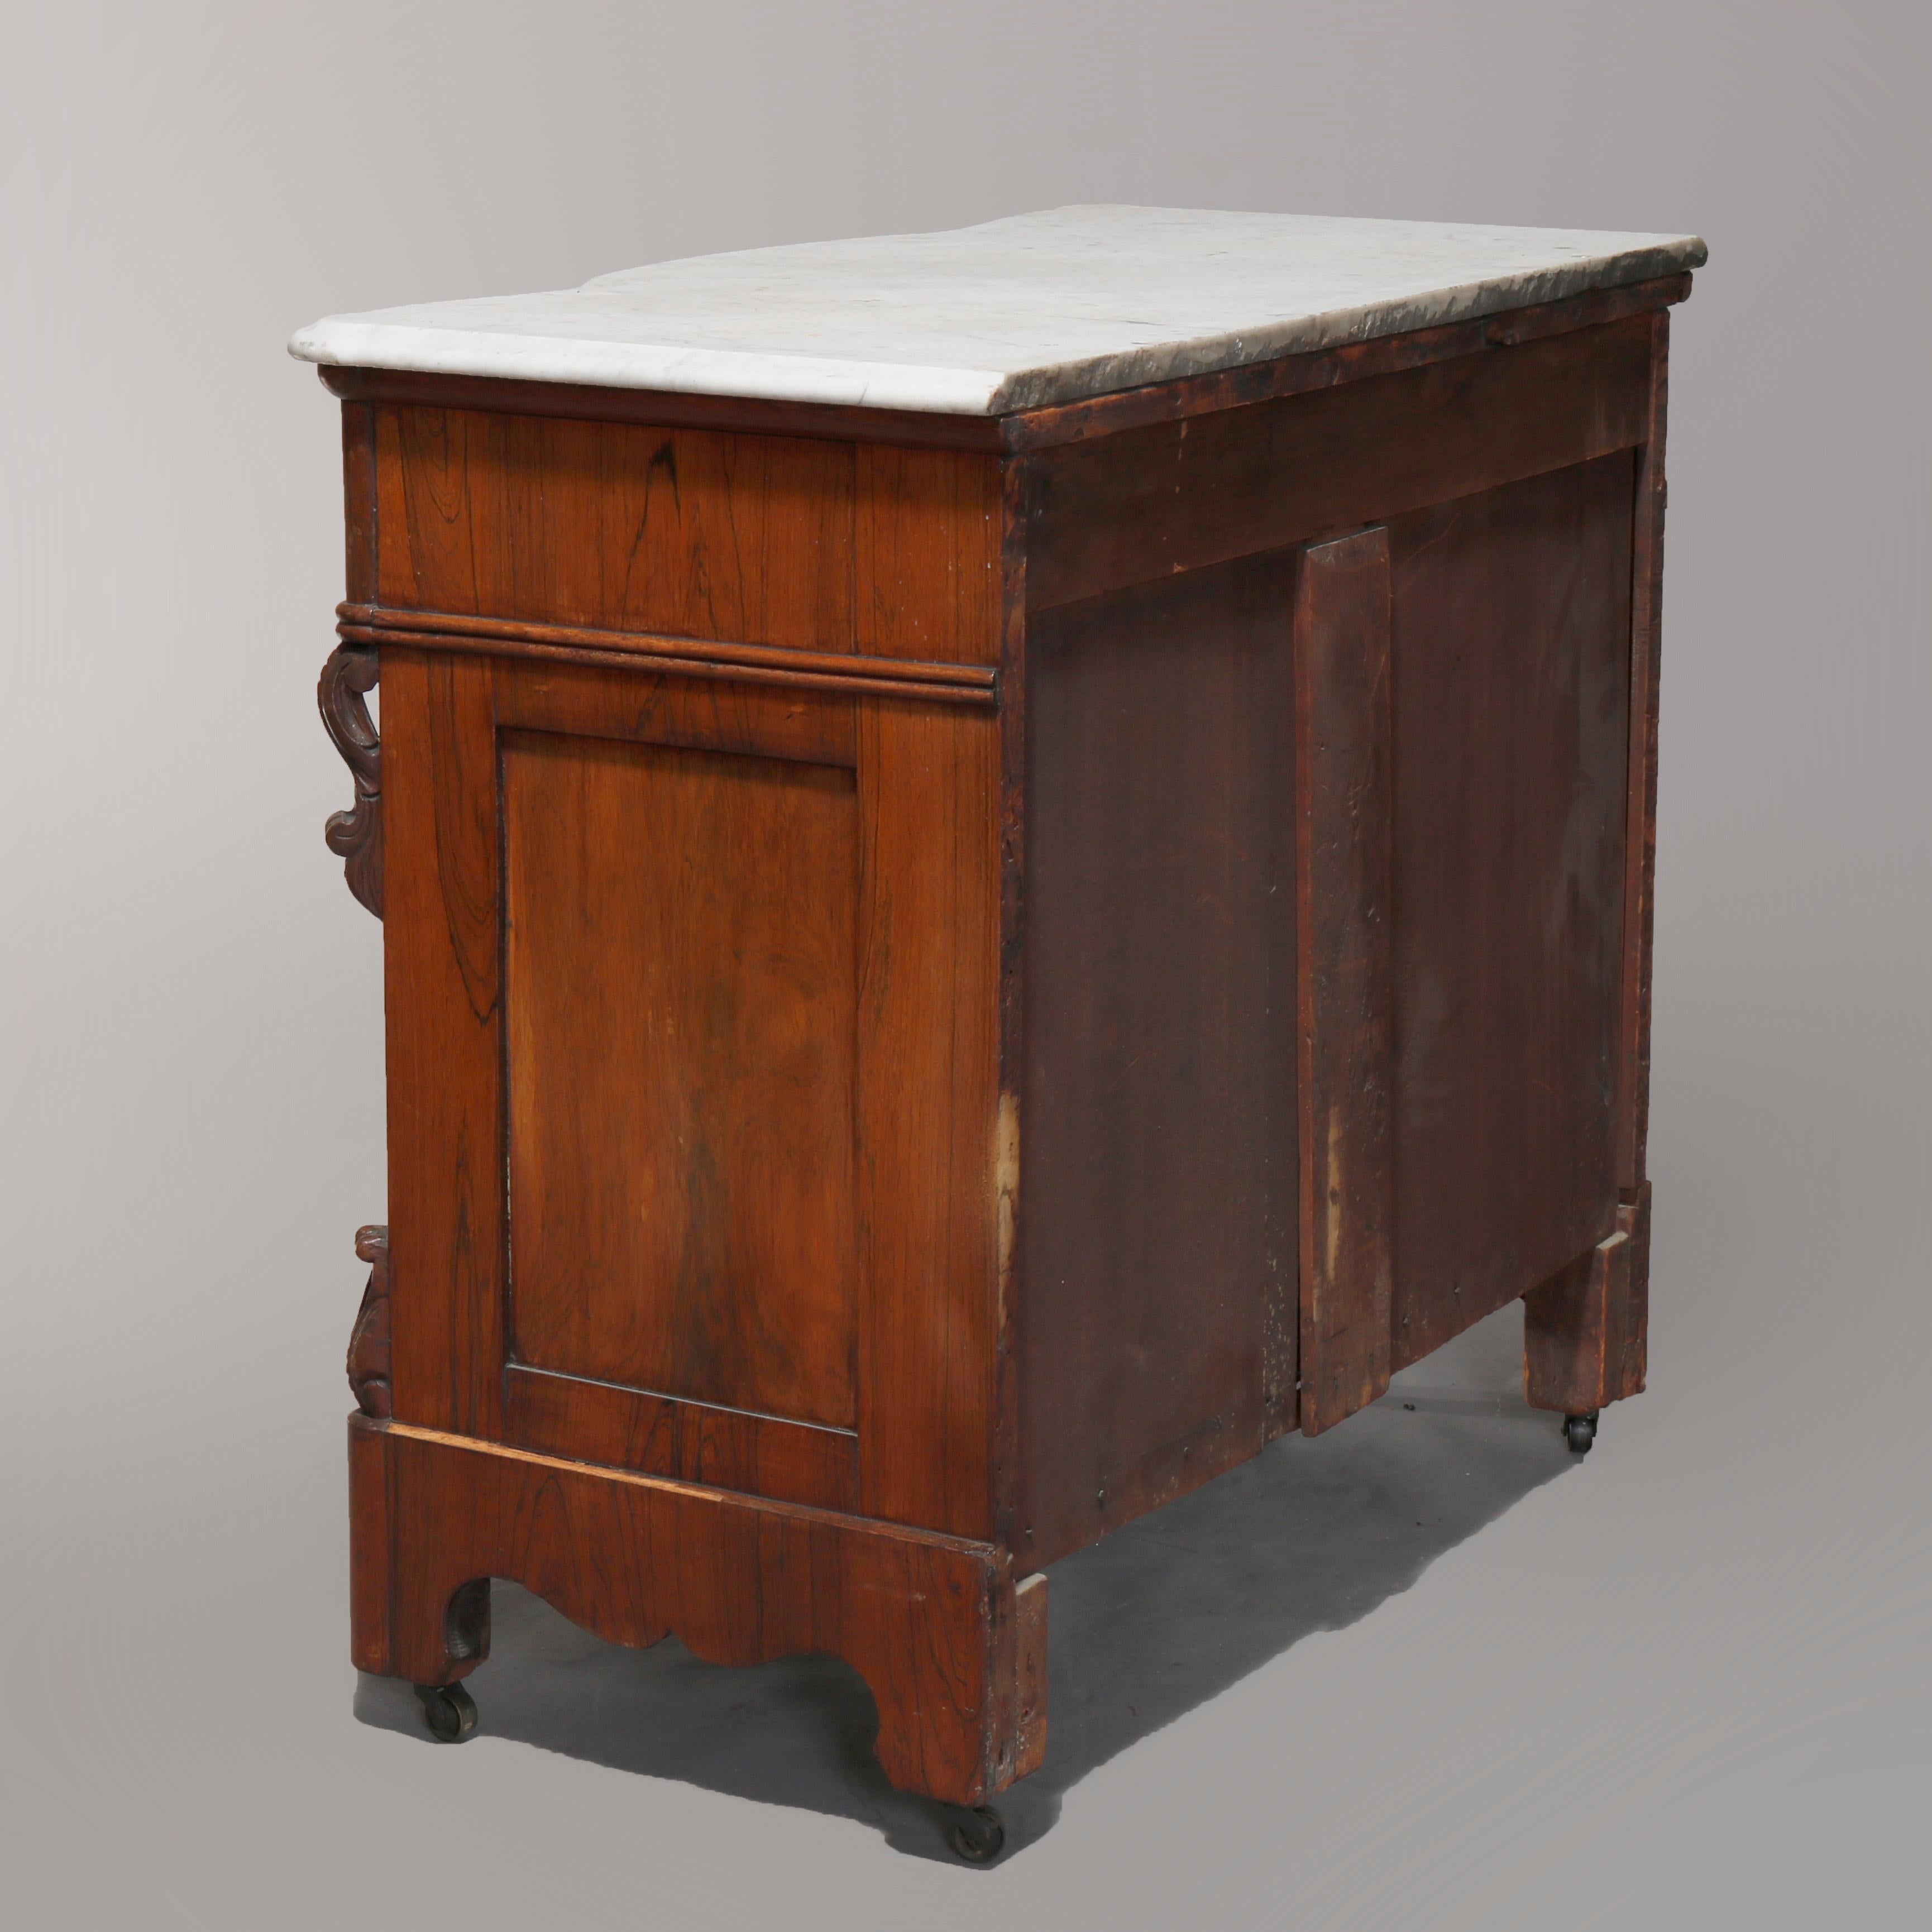 American Antique Victorian Rococo Rosewood and Marble Top Commode, circa 1860